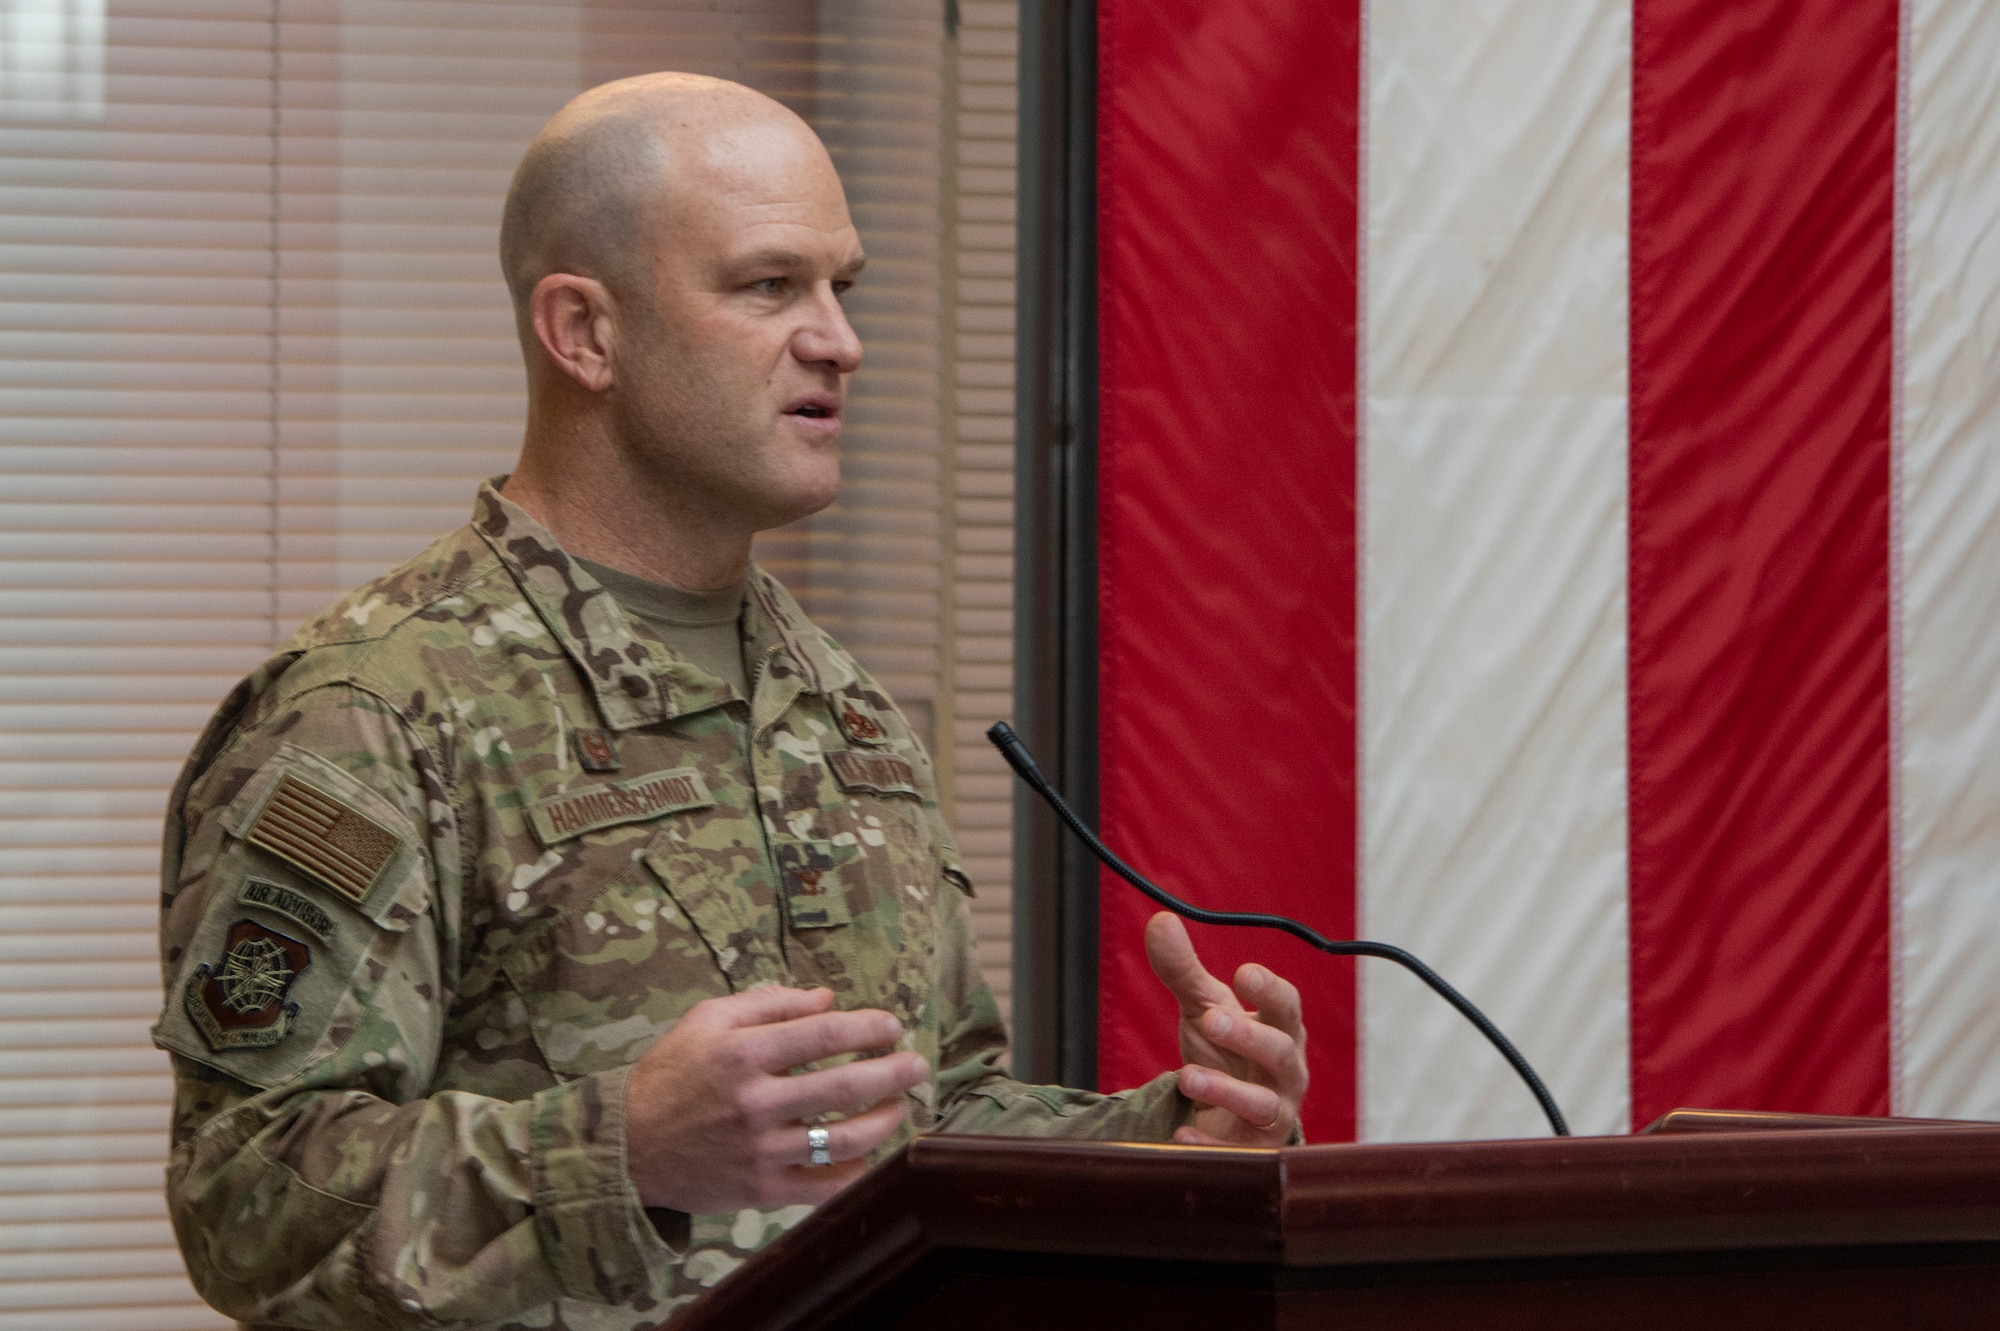 U.S. Air Force Col. David Hammerschmidt, 60th Aircraft Maintenance Group commander, delivers the opening remarks during the Key Spouse Recognition event at the 60th MXG atrium Feb. 8, 2019, at Travis Air Force Base, California. The Key Spouse Program is an Air Force-wide volunteer program that builds and fosters support for military families through outreach education events and providing families a link to leadership.(U.S. Air Force photo by Heide Couch)